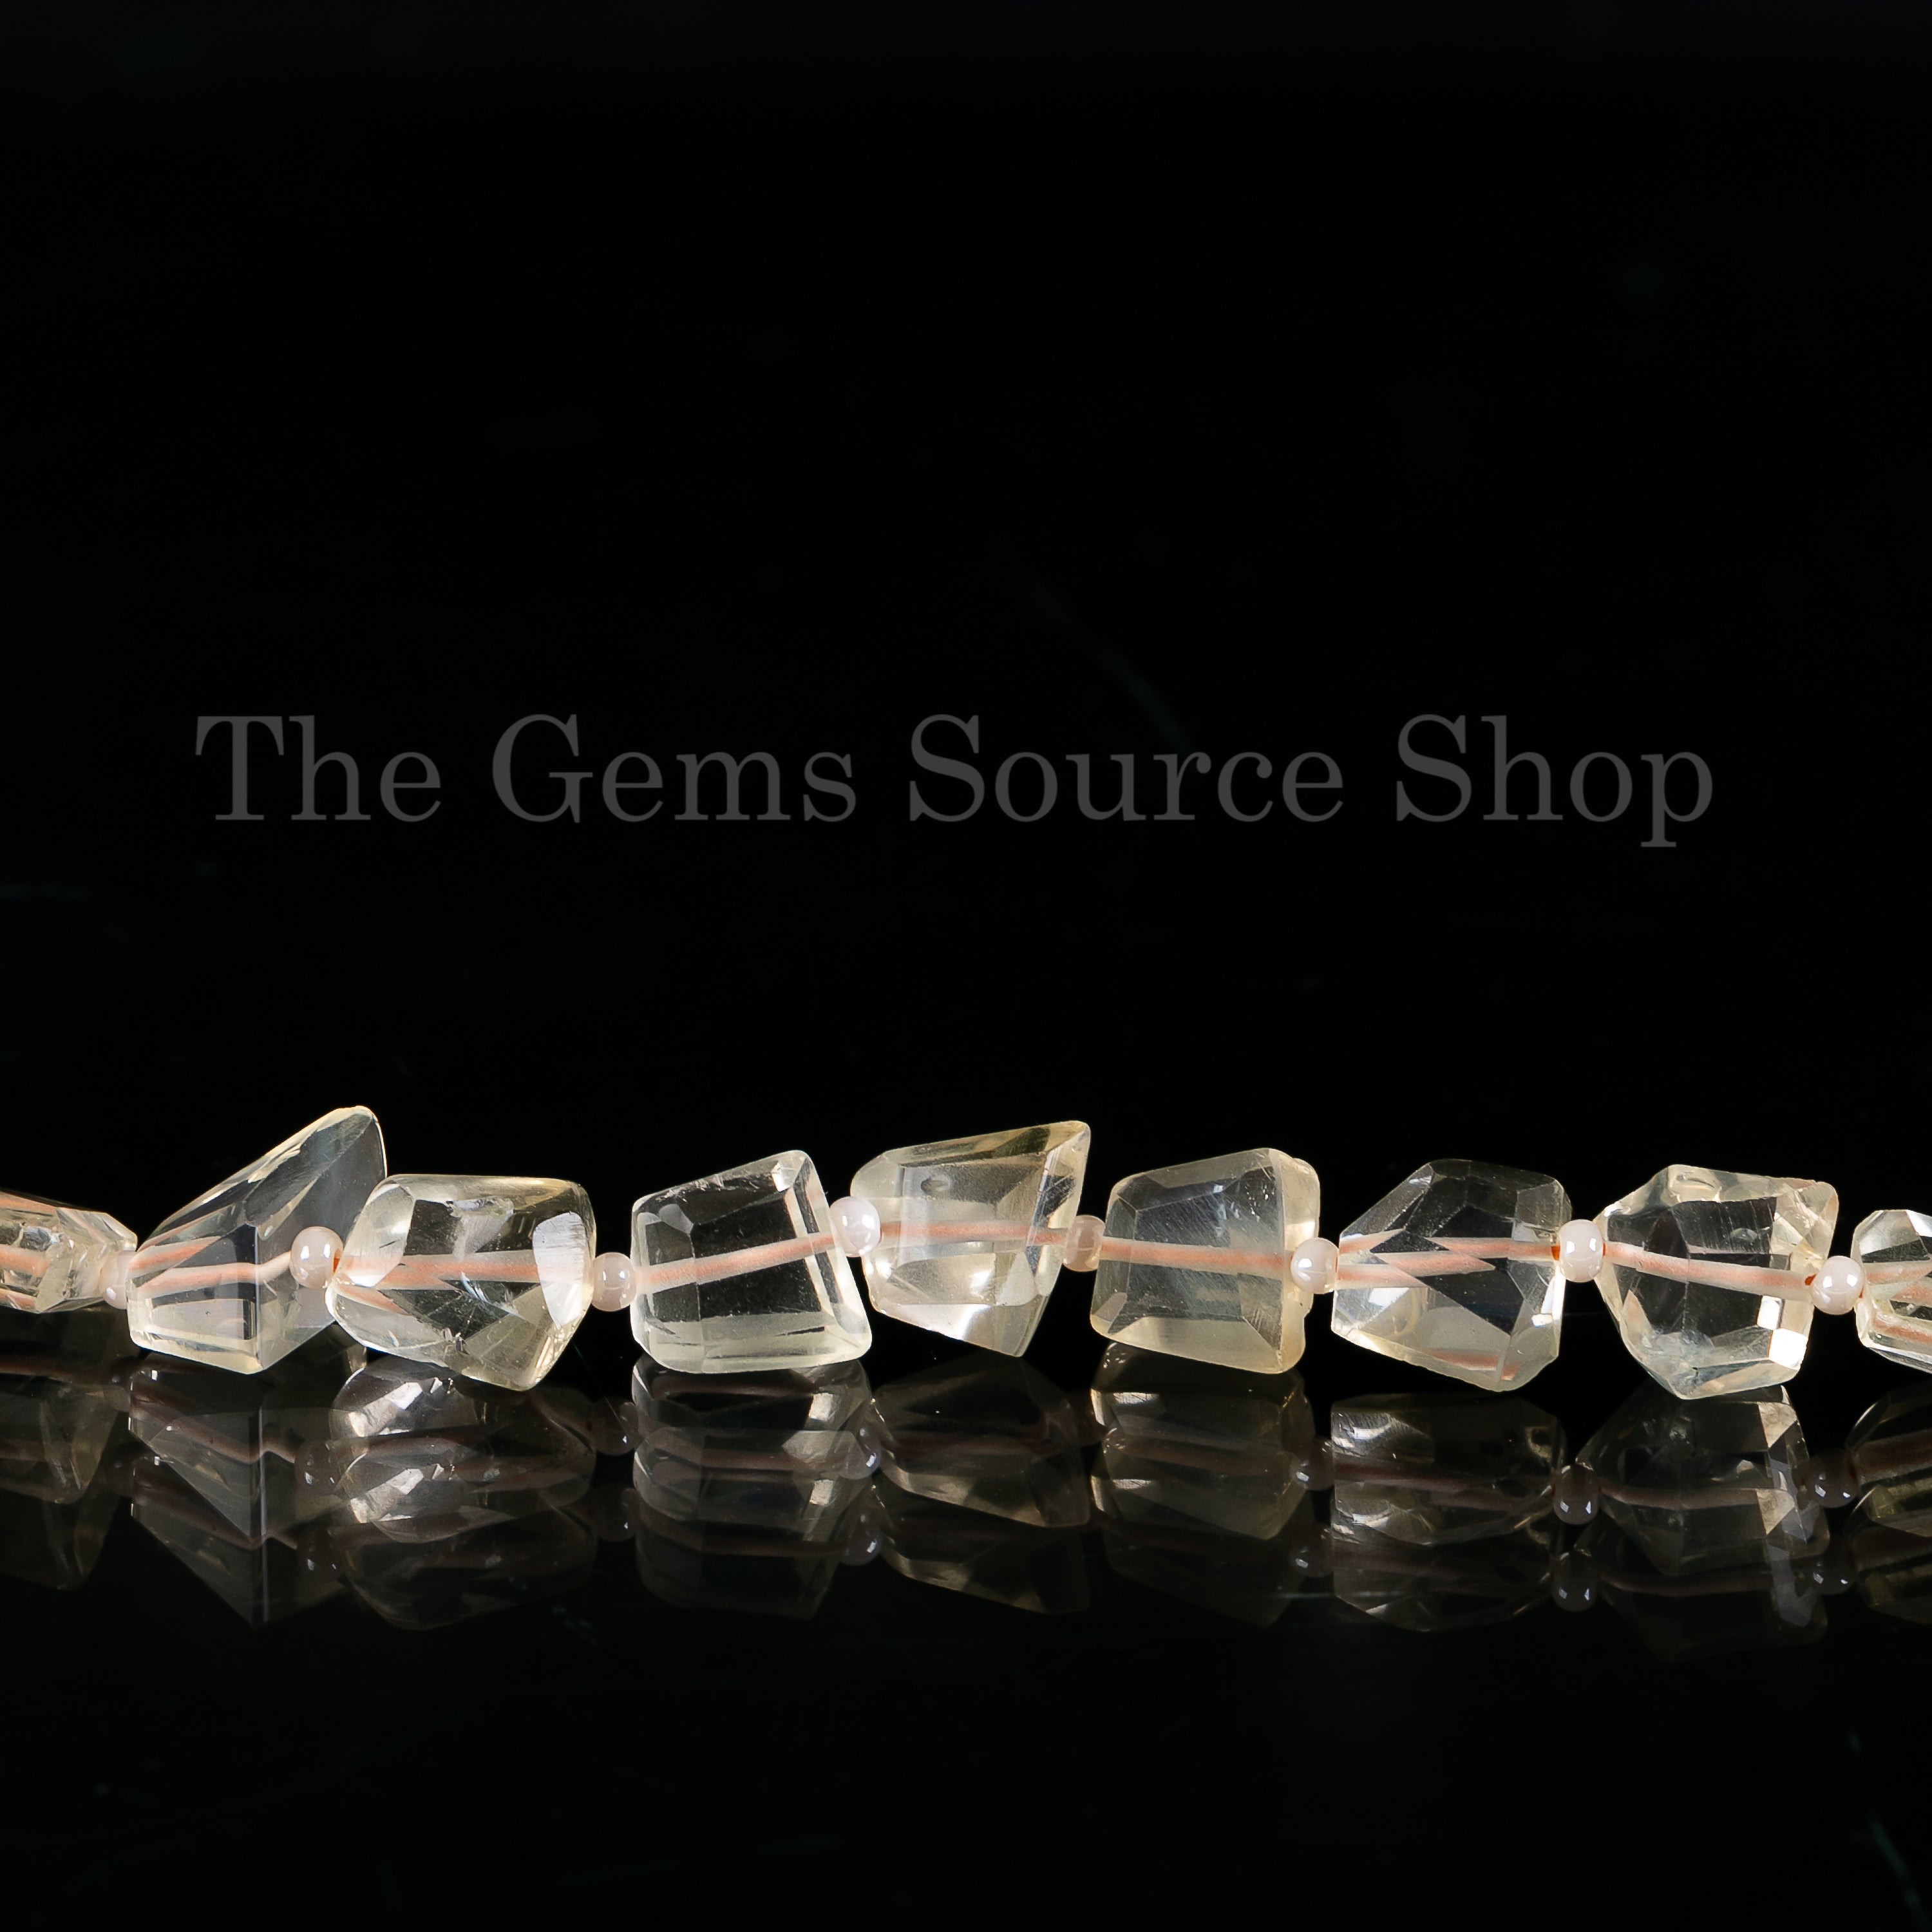 Citrine Faceted Beads, Citrine Faceted Nugget Beads, Citrine Fancy Shape Beads, Wholesale Beads